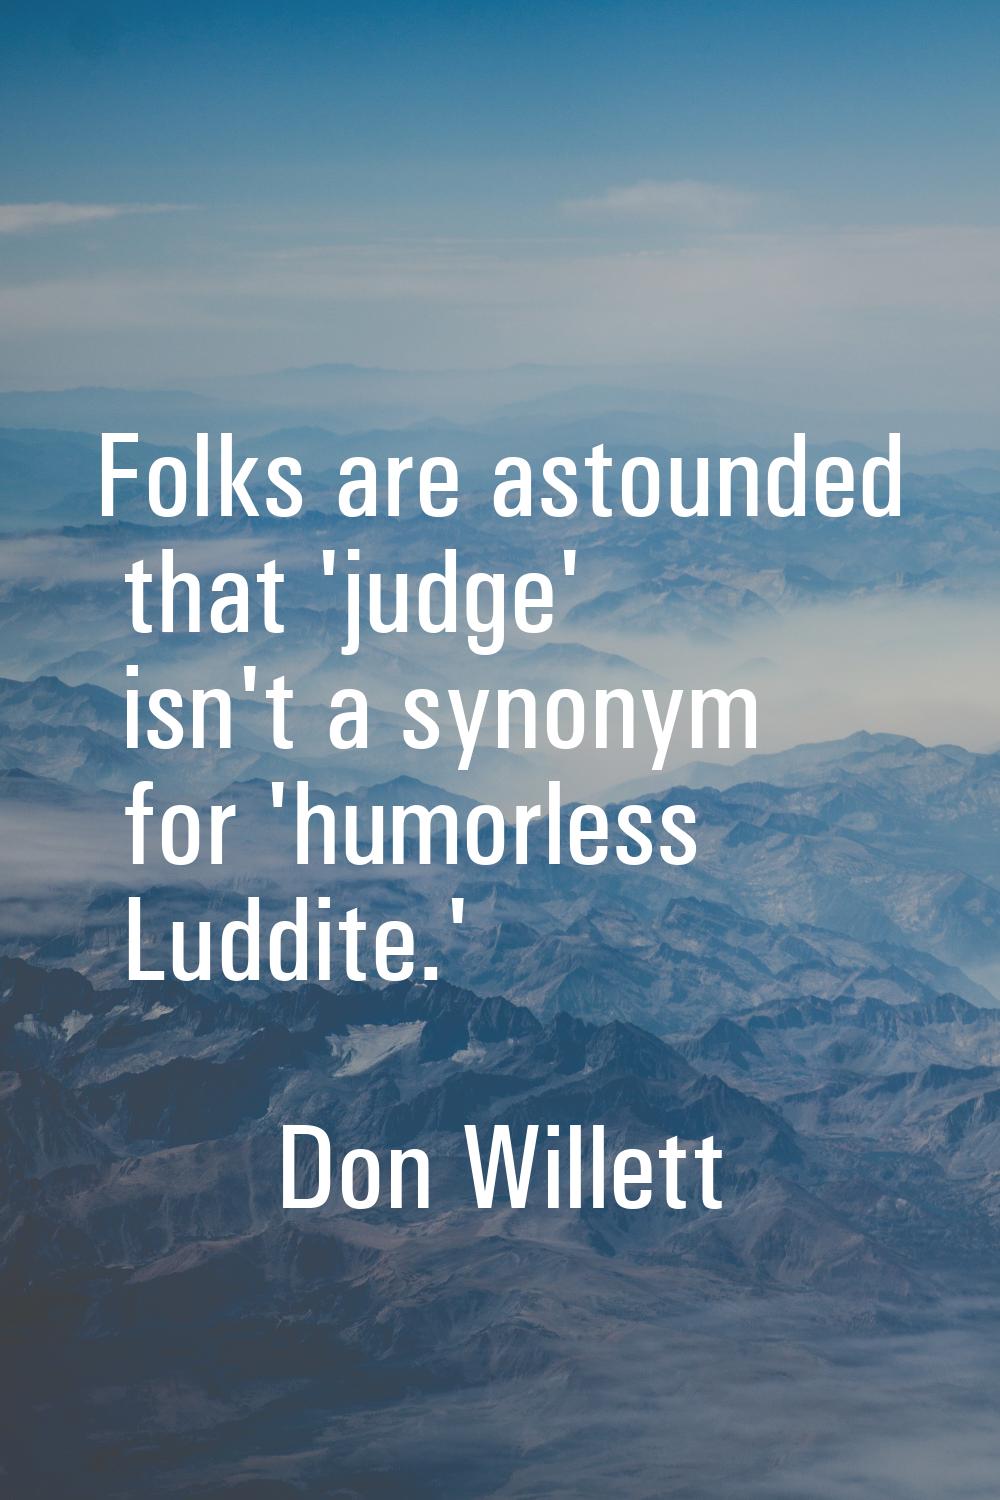 Folks are astounded that 'judge' isn't a synonym for 'humorless Luddite.'